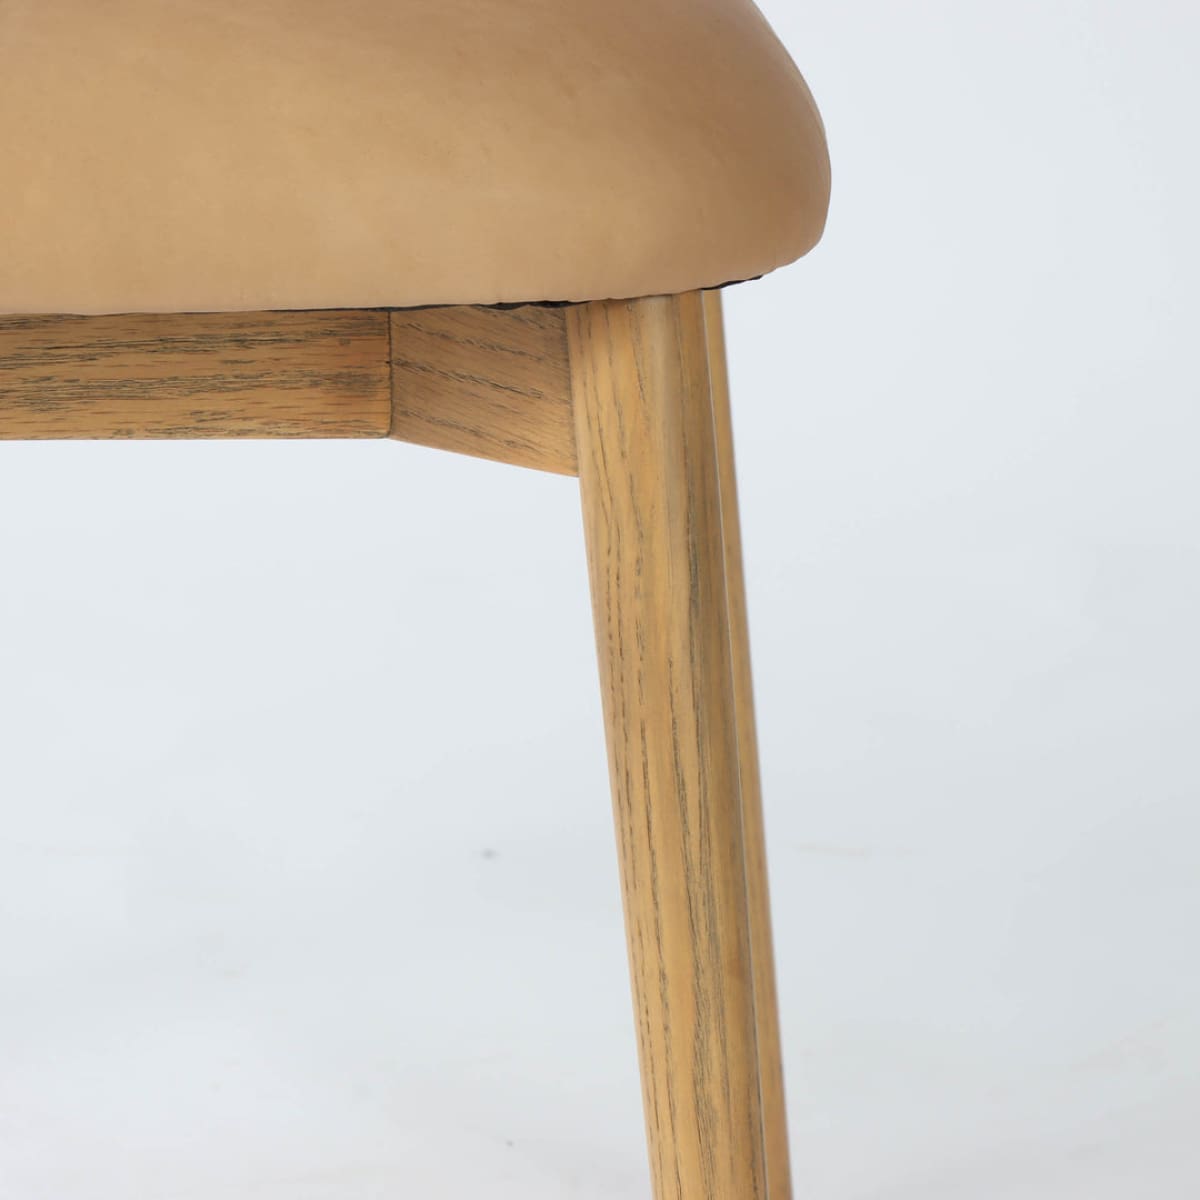 Milo Dining Chair - Tan Leather - lh-import-dining-chairs